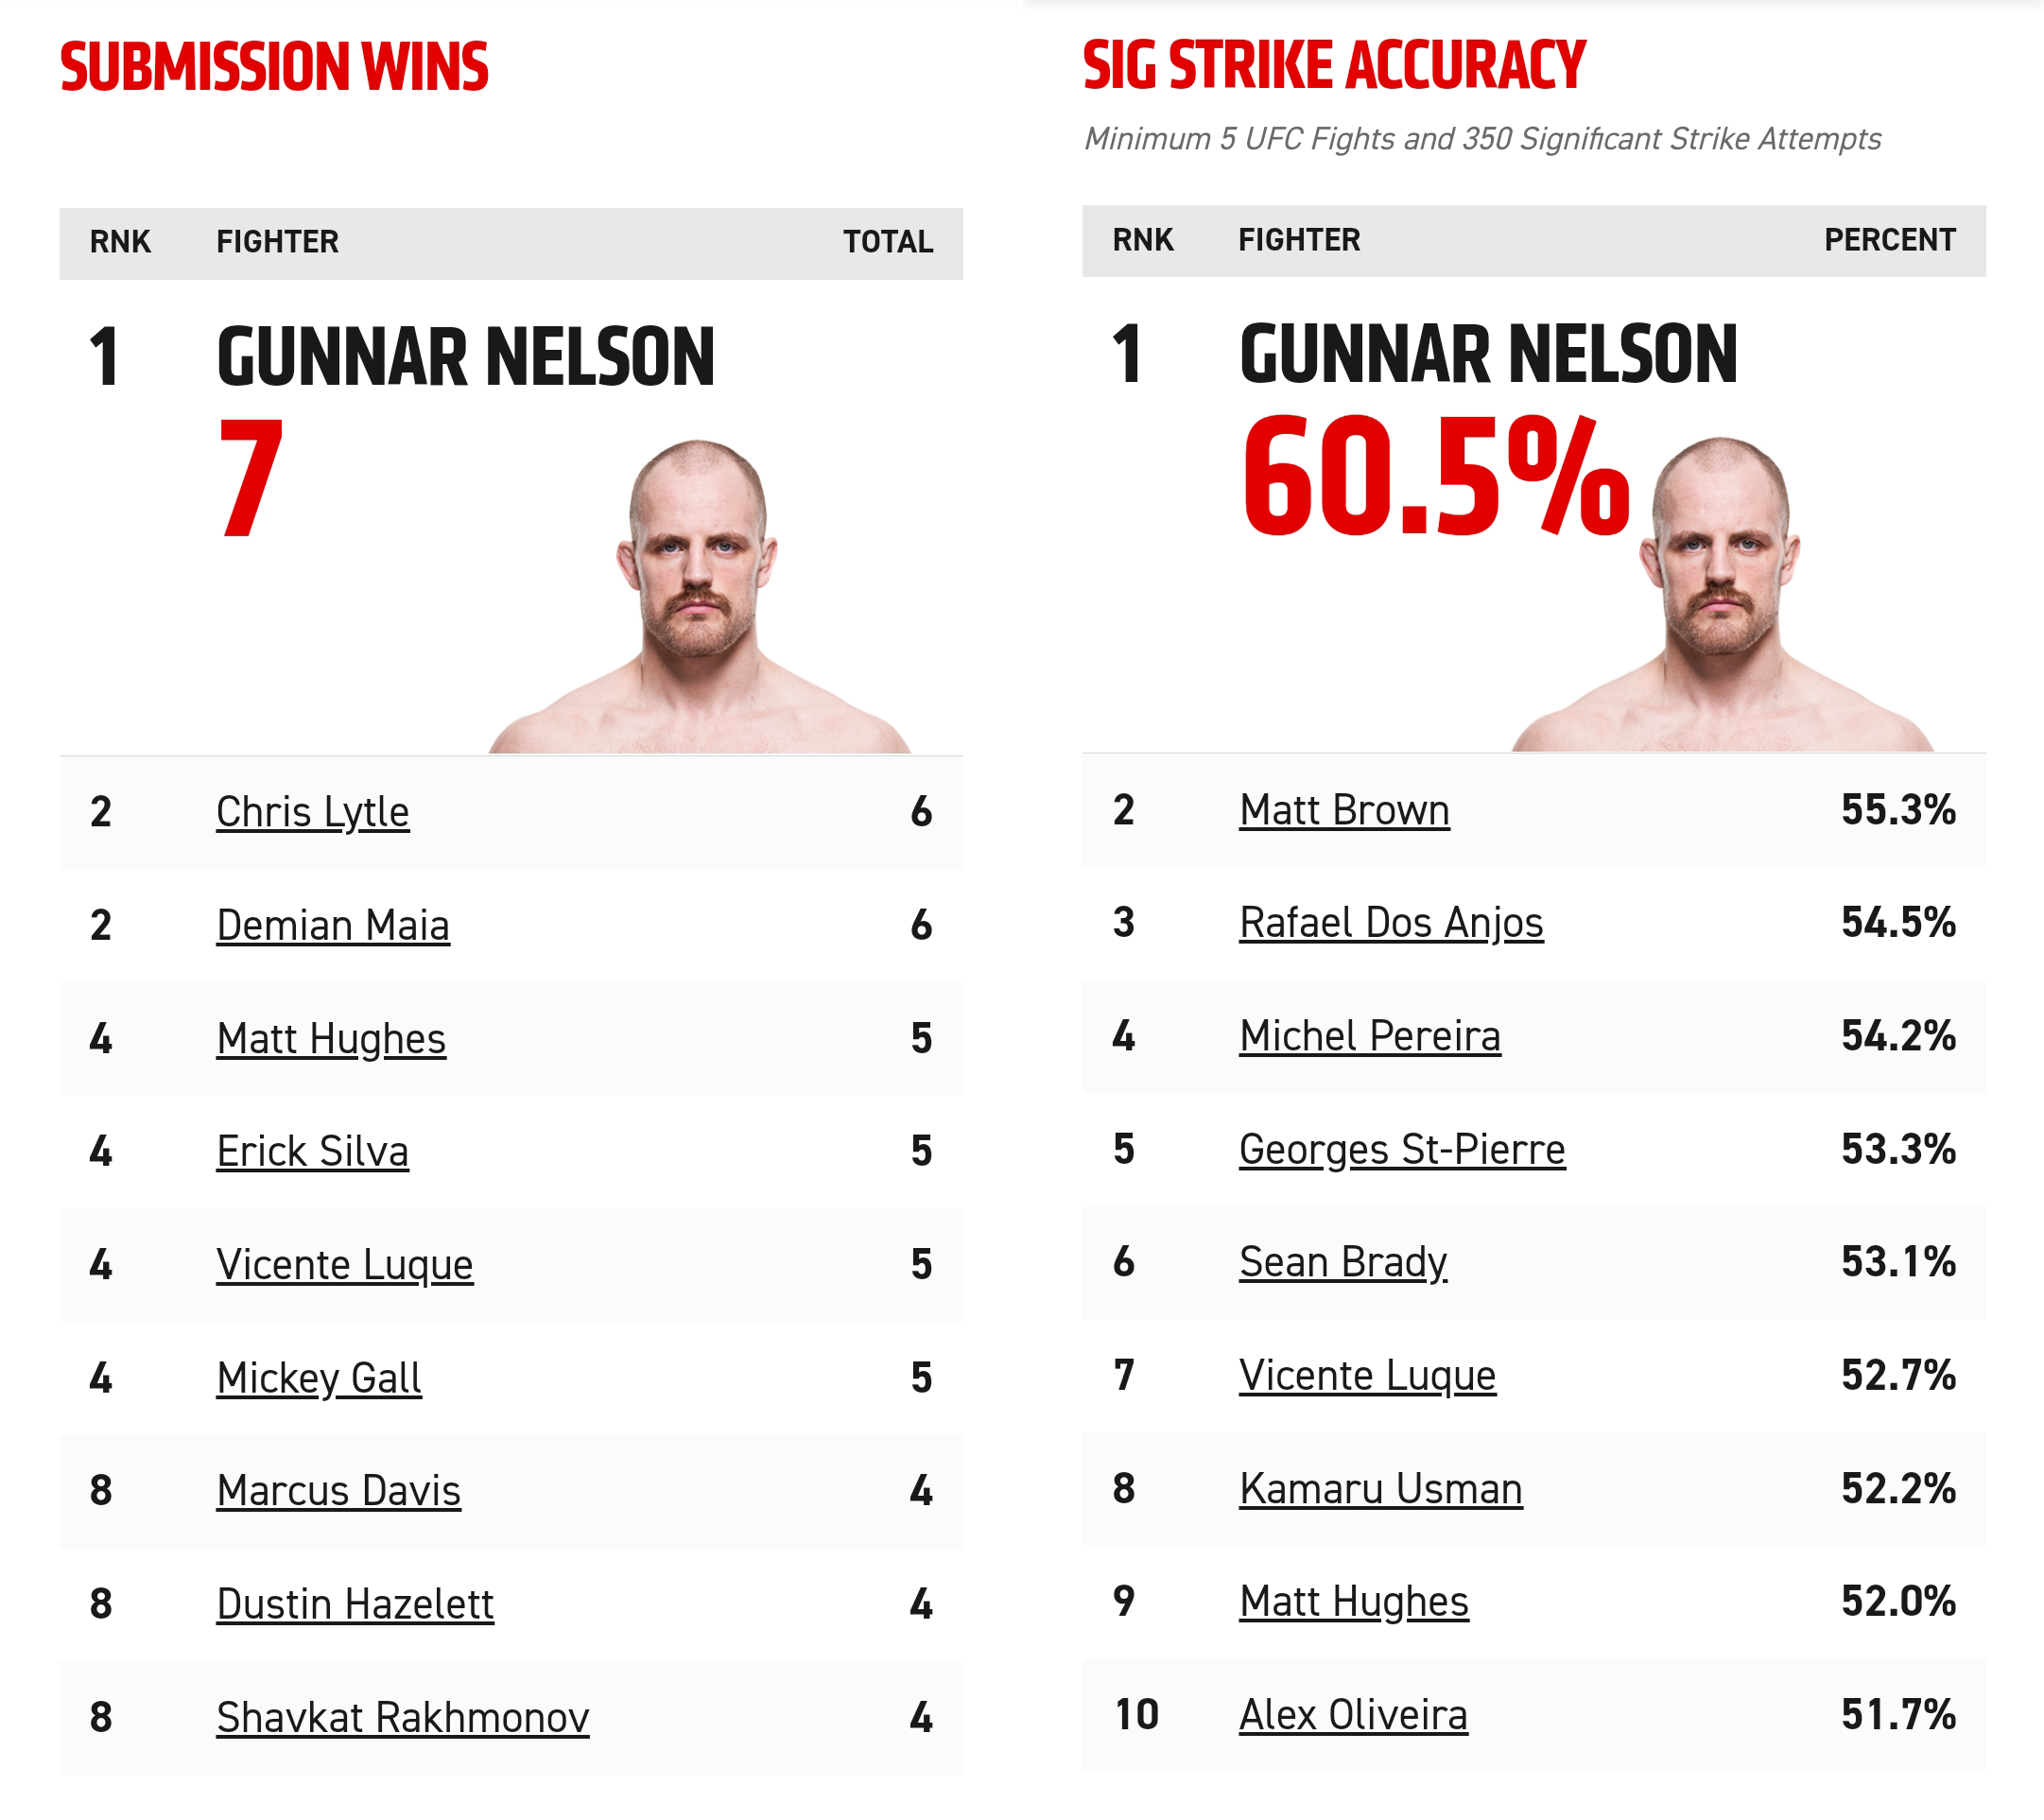 UFC records for most Submissions Wins and Significant Strike Accuracy